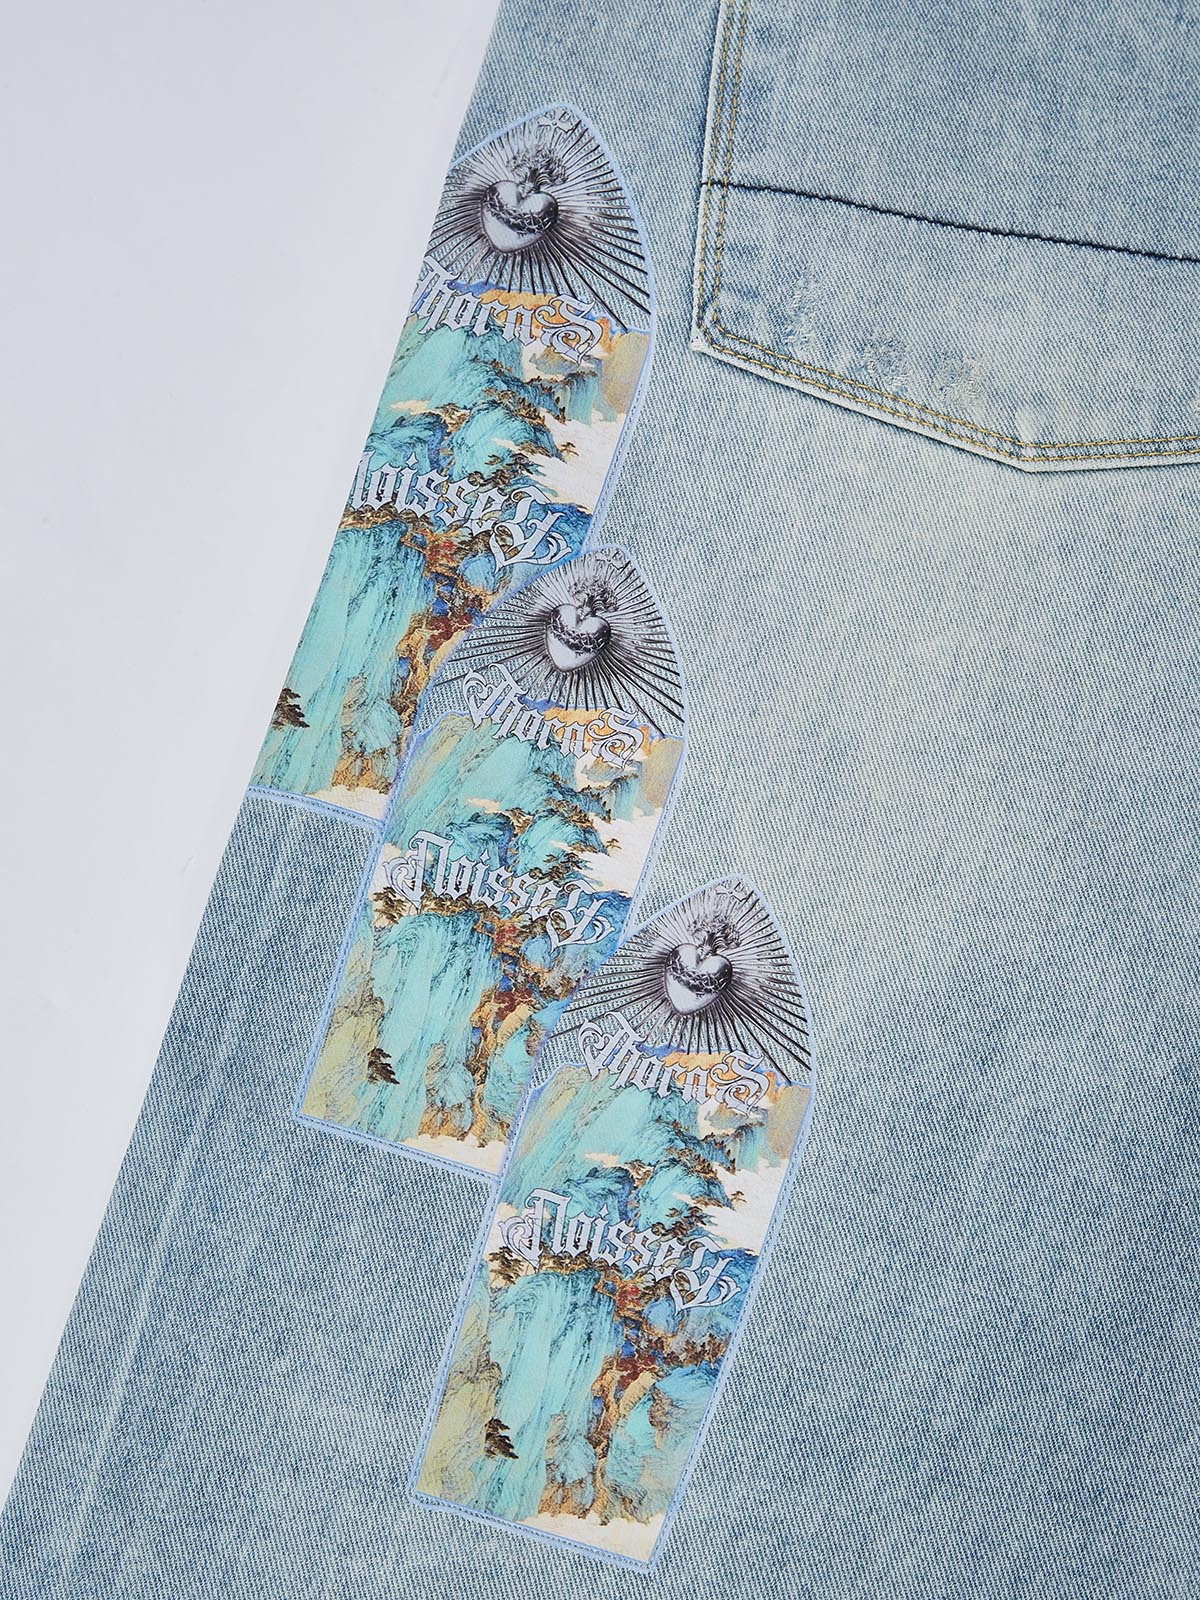 OBSTACLES & DANGERS© Ripped Stained glass Print Jeans